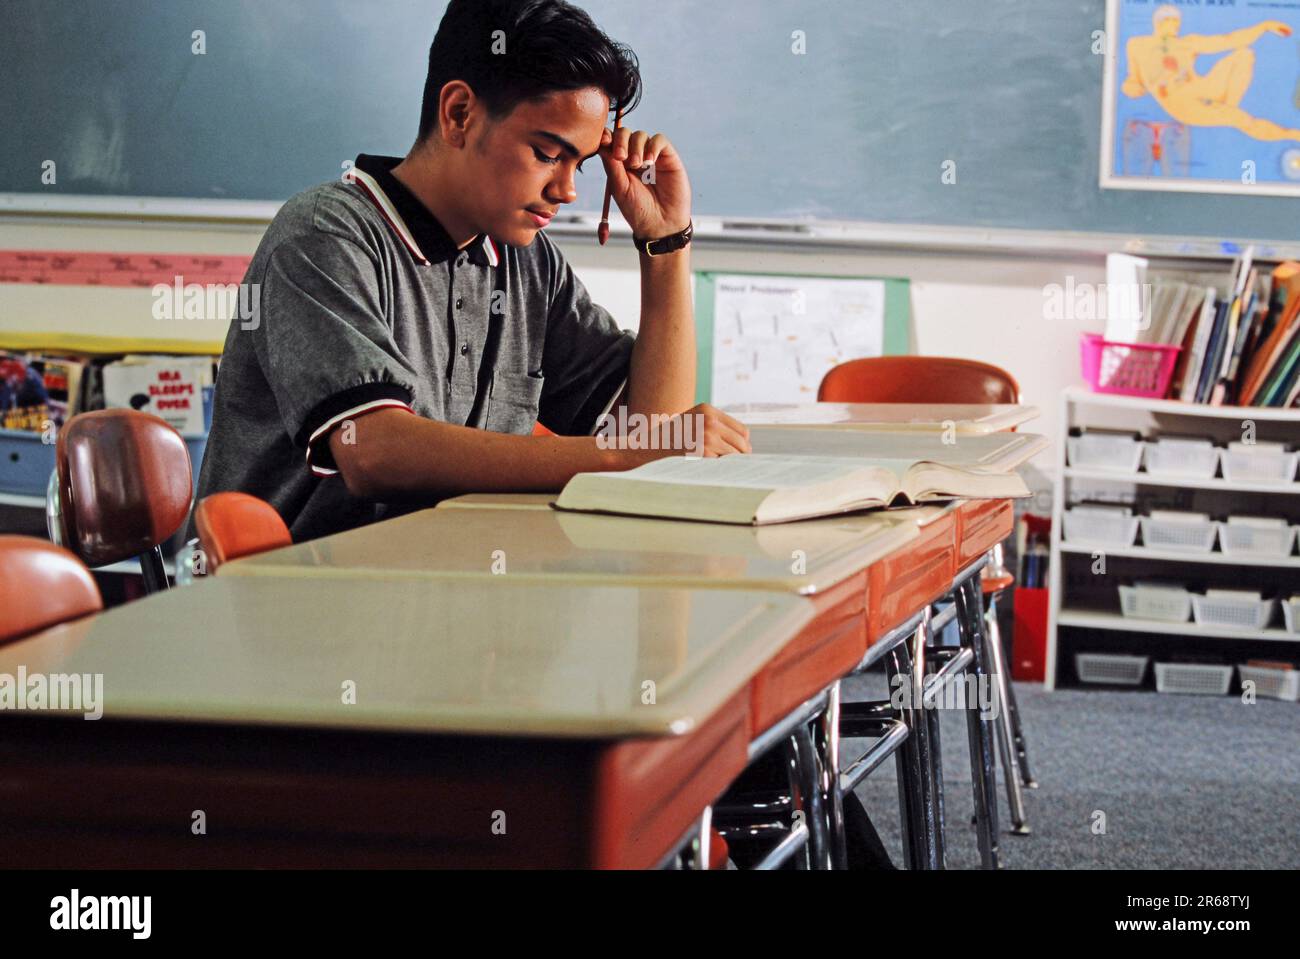 A Latino High school student studying alone at his desk with an open textbook Stock Photo